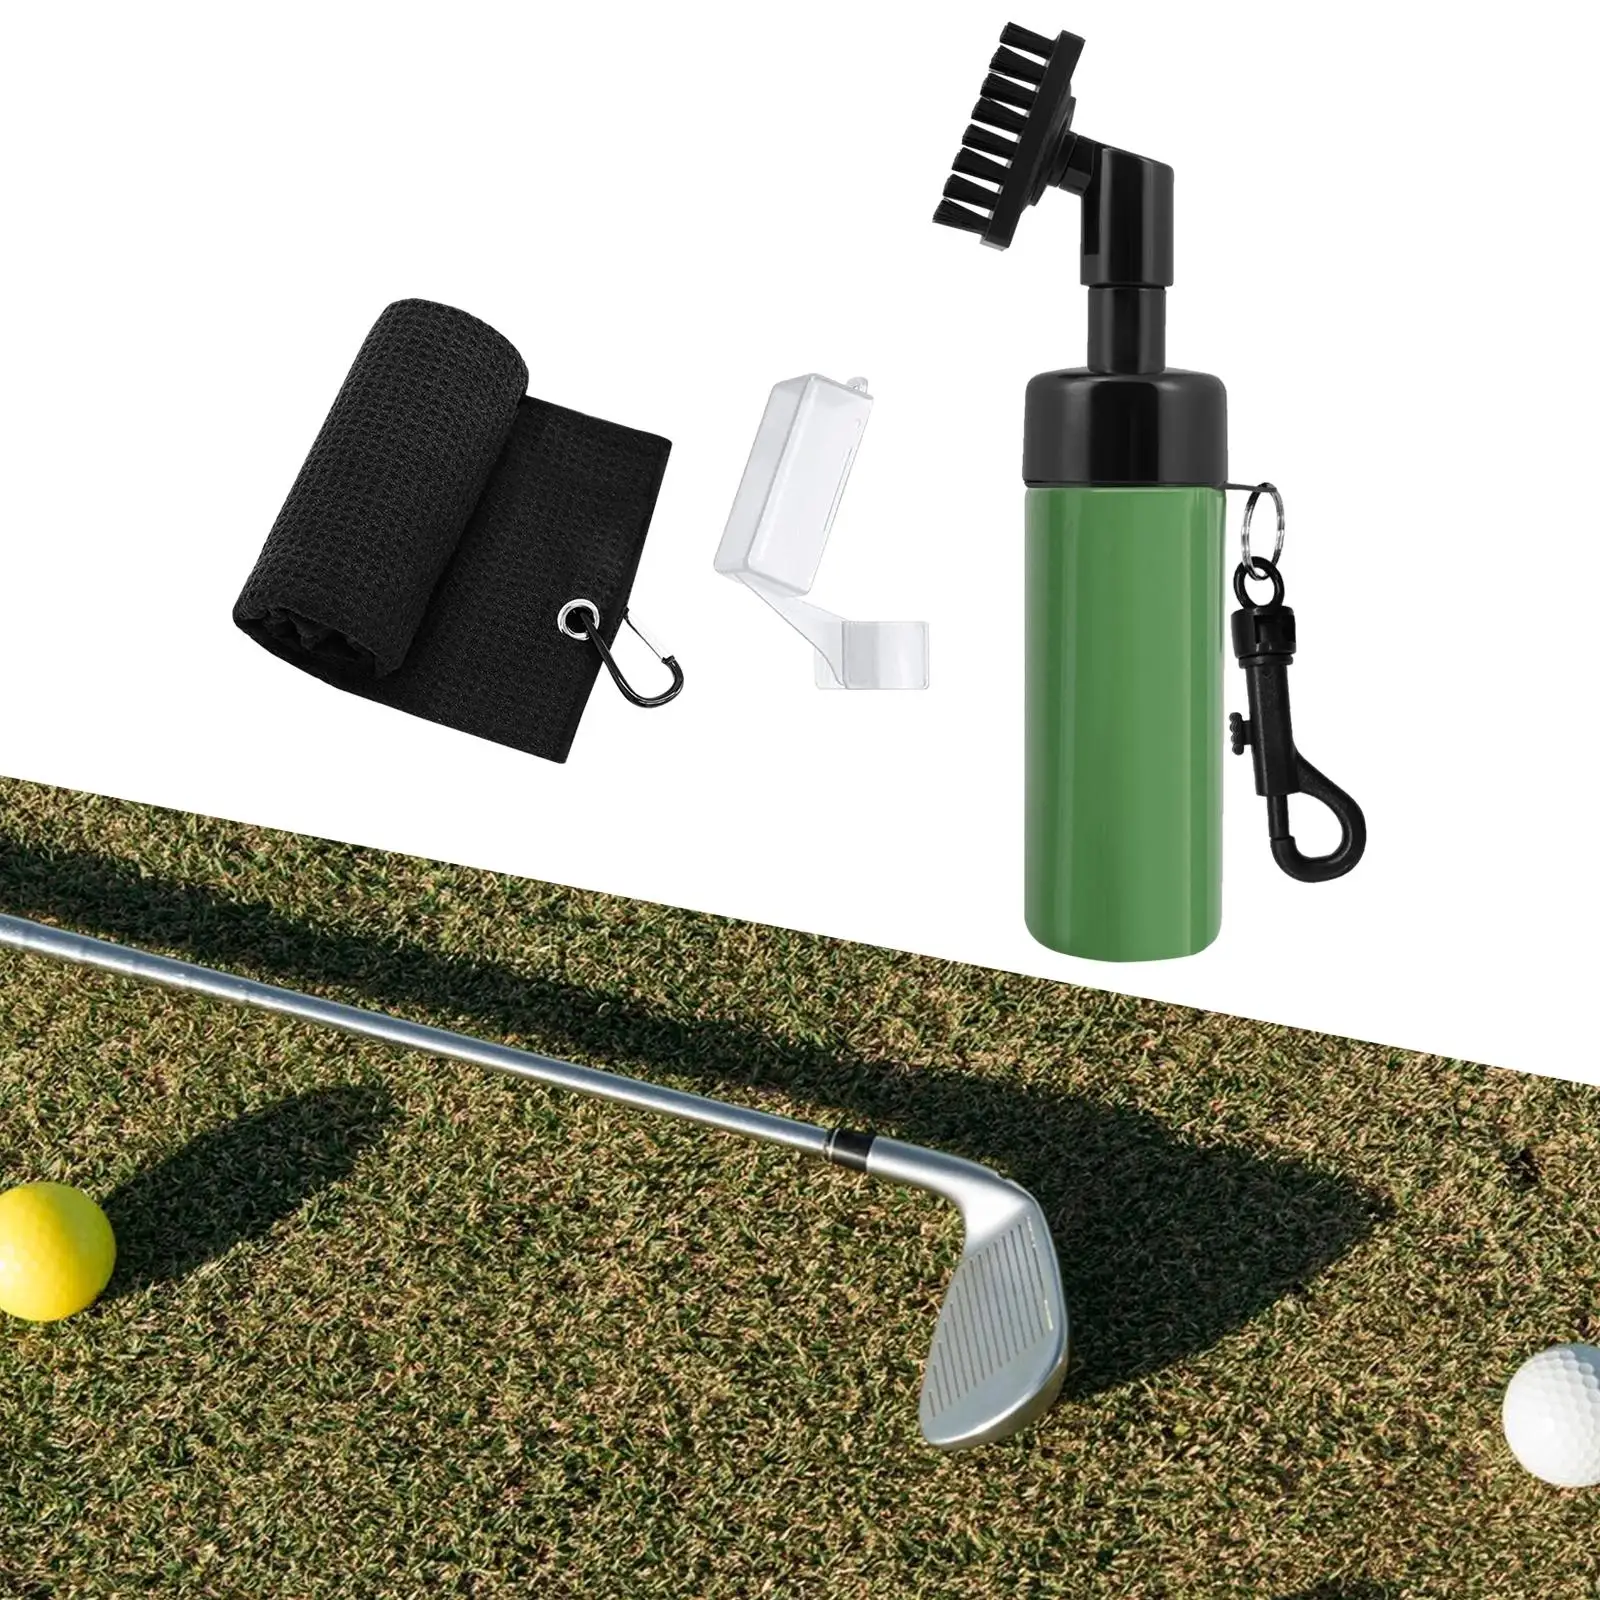 Golf Club Brush with Water Bottle, Golf Club Towel, Golf Cleaning Brush with Clip